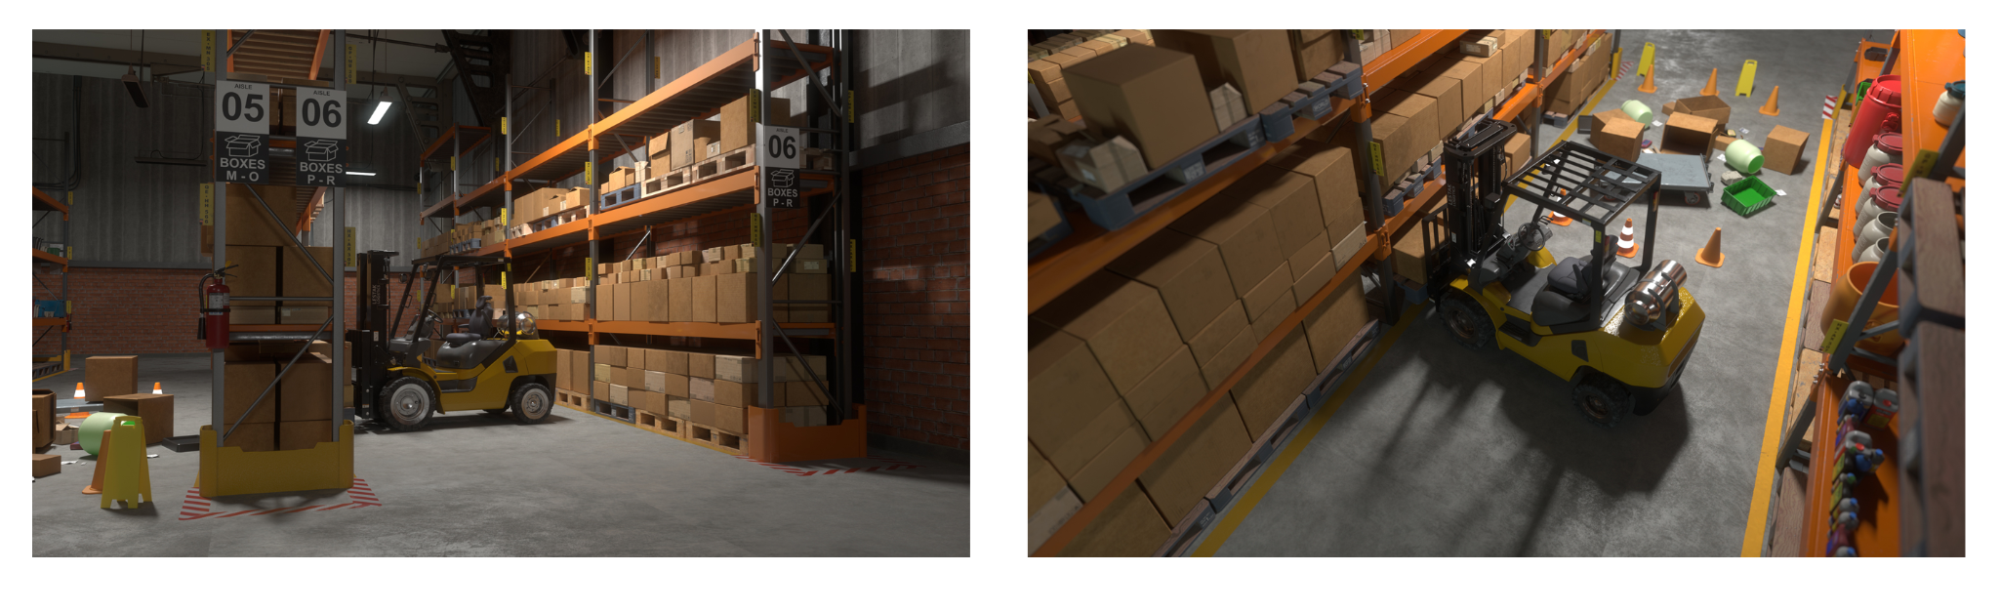 Two angles of a warehouse simulation featuring a forklift retrieving boxes from storage racks using the new Omniverse OpenPBR material library.